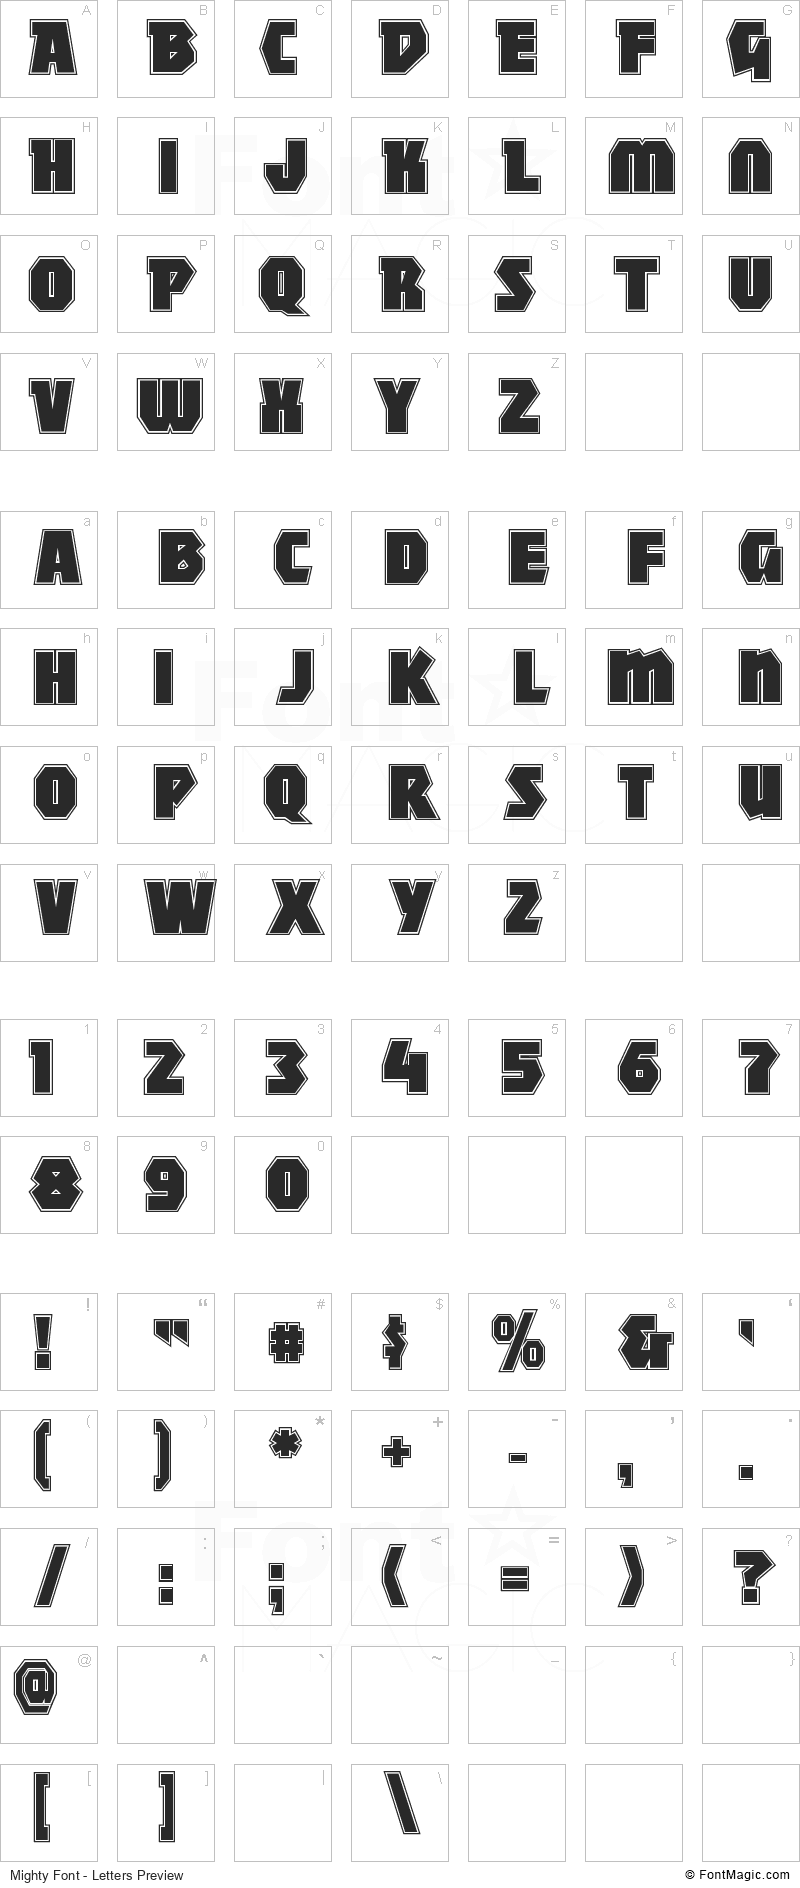 Mighty Font - All Latters Preview Chart